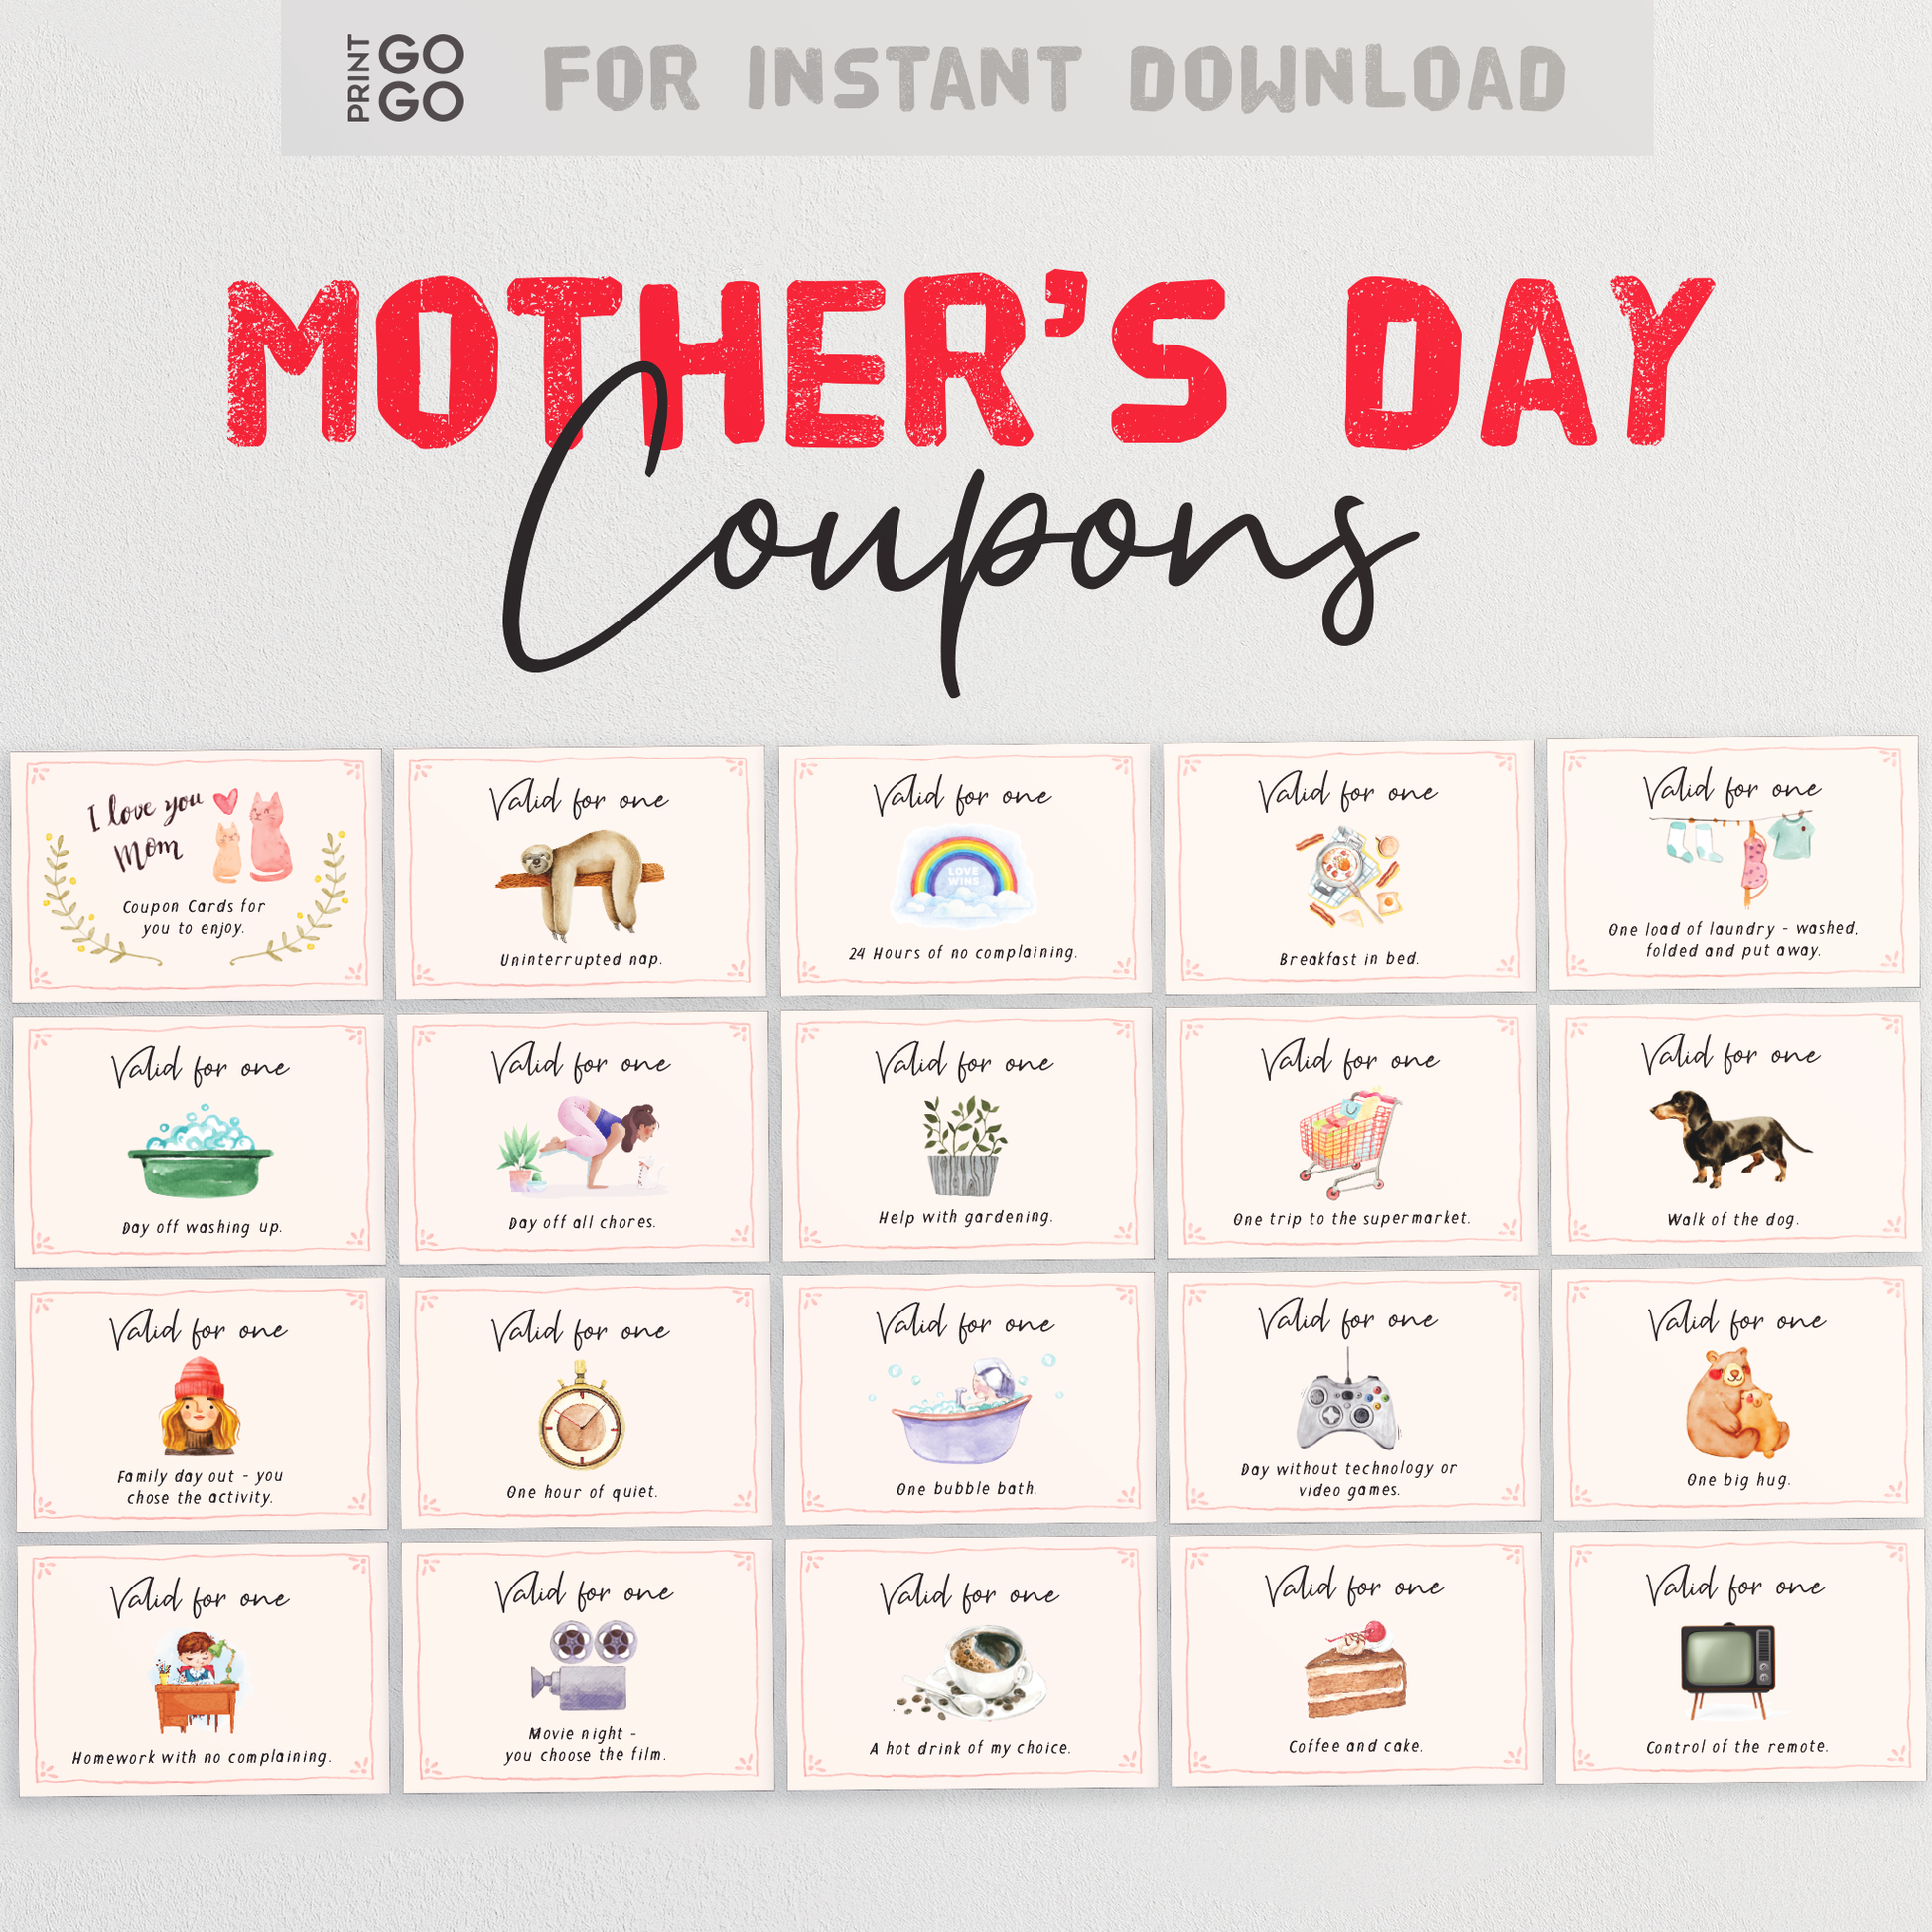 Mother's Day Coupons - A Budget Friendly Printable Gift To Surprise Her With